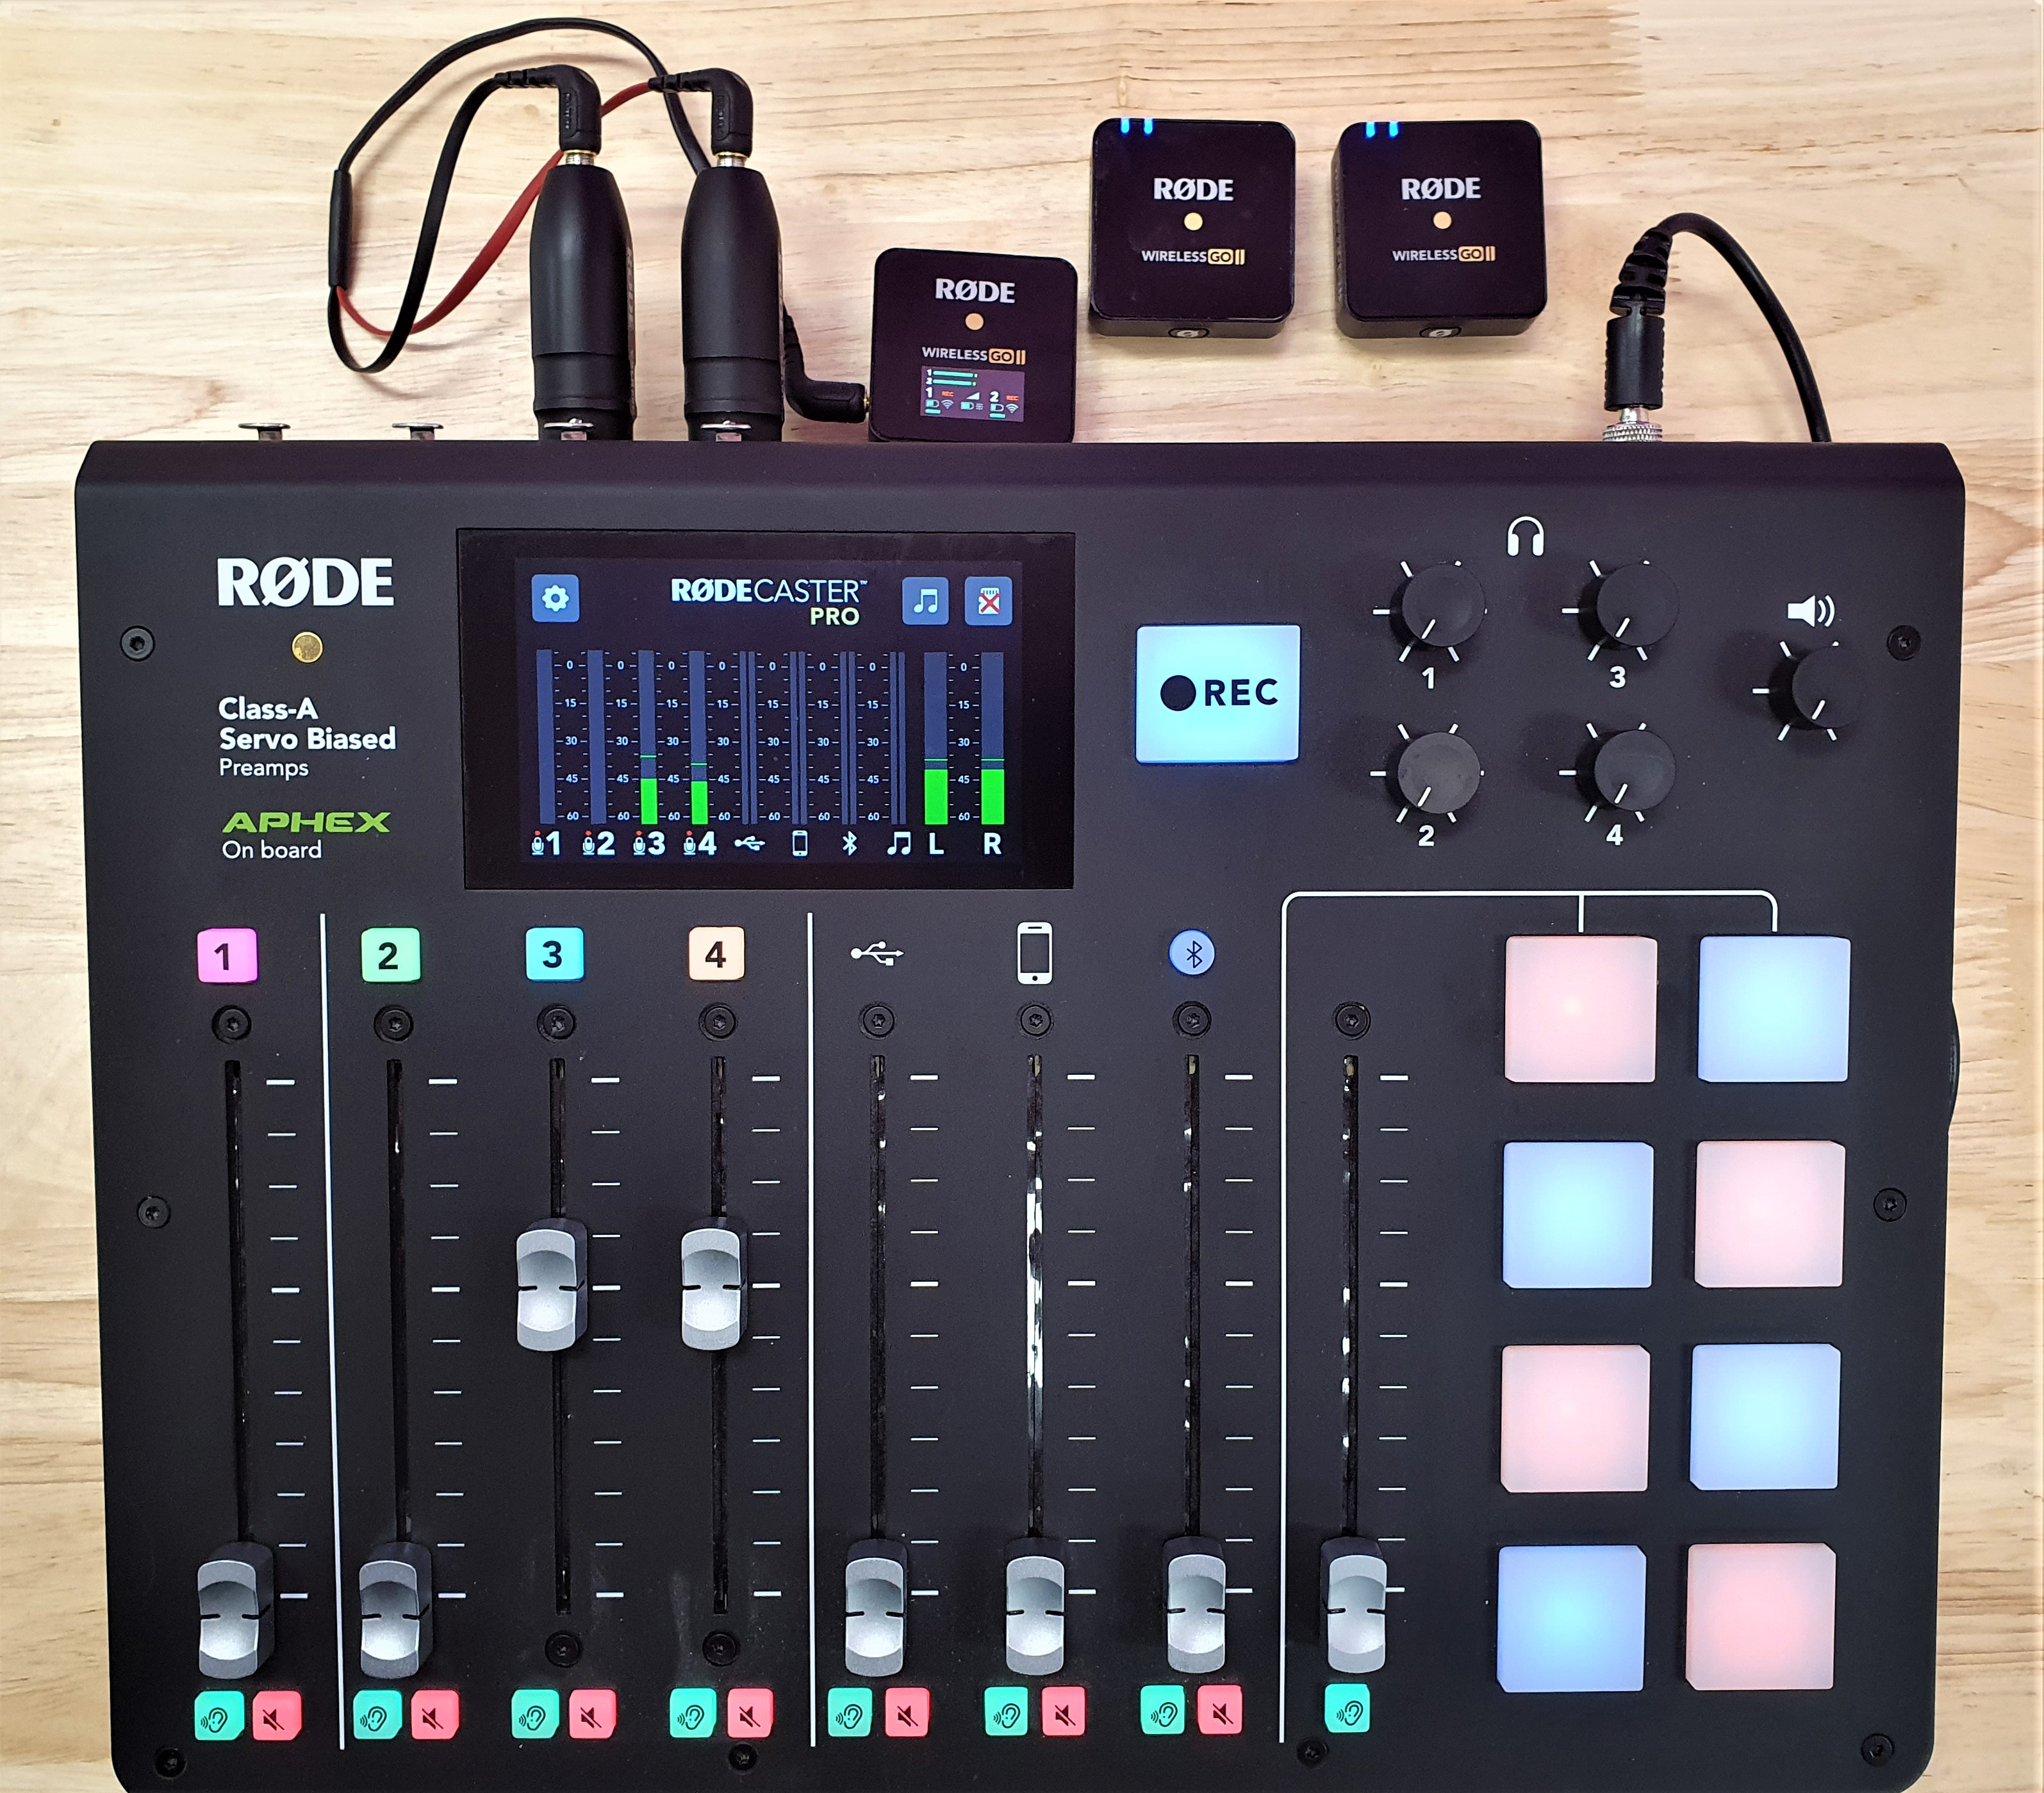 How to connect Wireless GO II to XLR inputs – RØDE